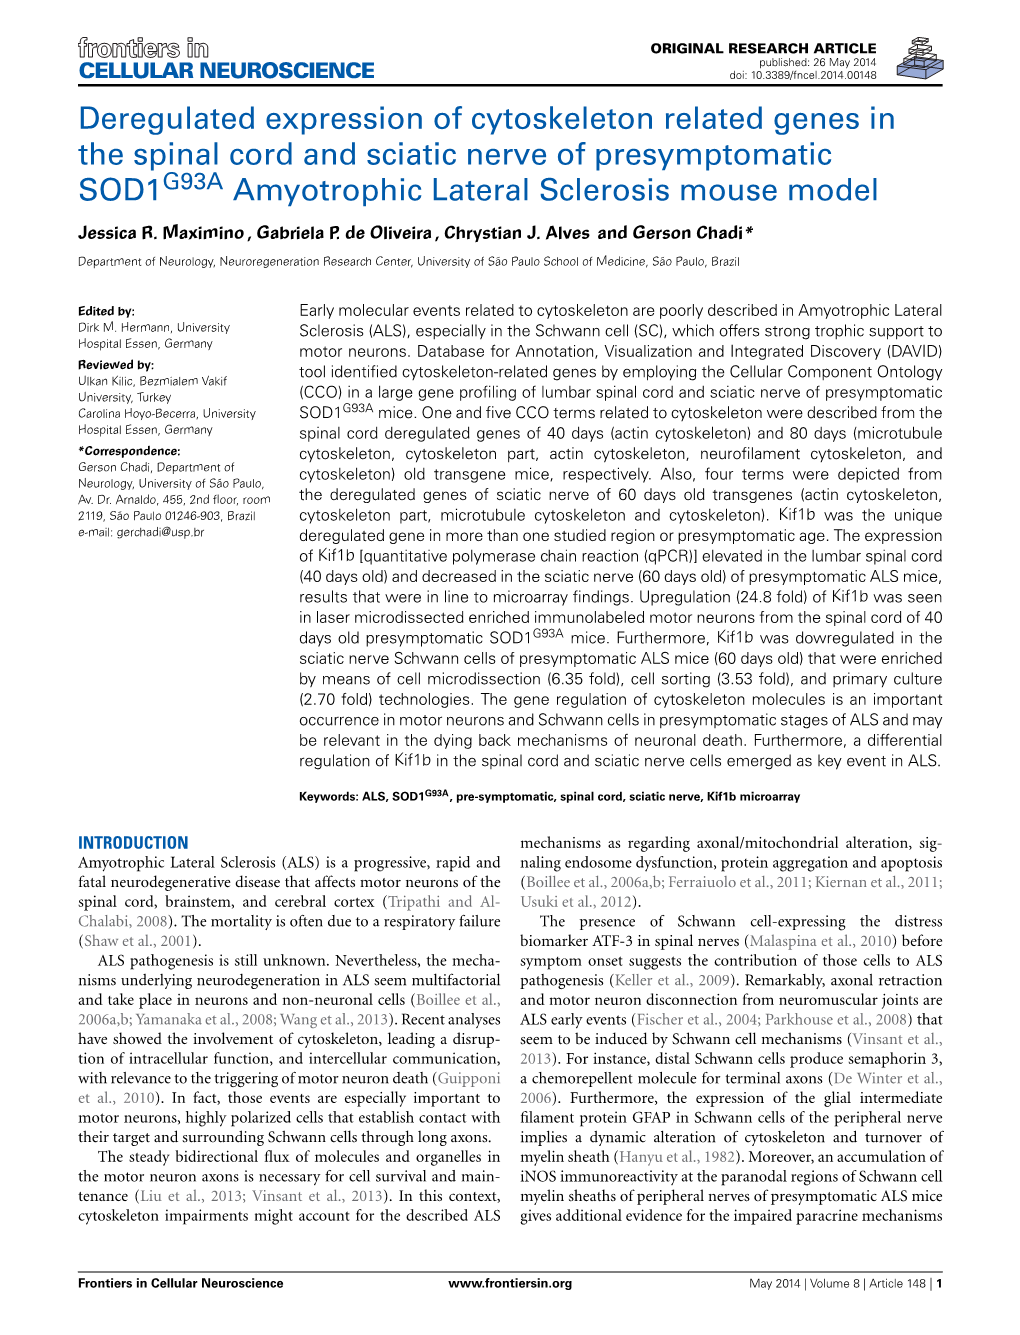 Deregulated Expression of Cytoskeleton Related Genes in the Spinal Cord and Sciatic Nerve of Presymptomatic SOD1G93A Amyotrophic Lateral Sclerosis Mouse Model